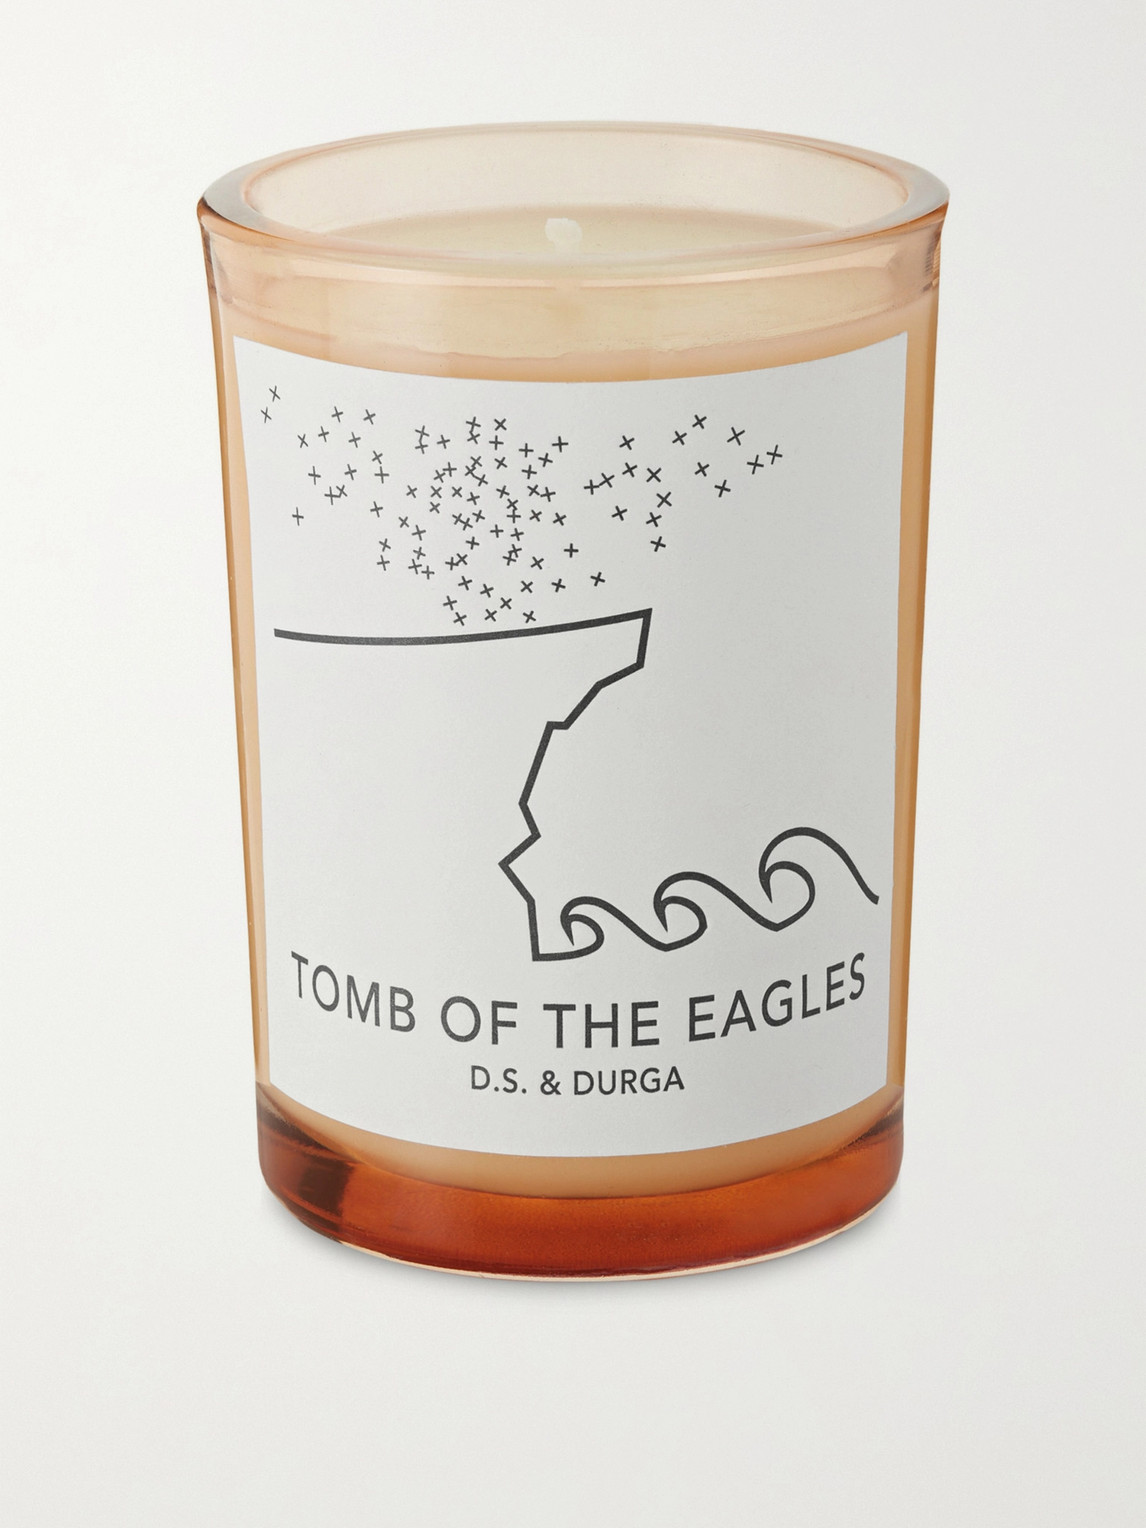 D.S. & DURGA TOMB OF THE EAGLES SCENTED CANDLE, 200G